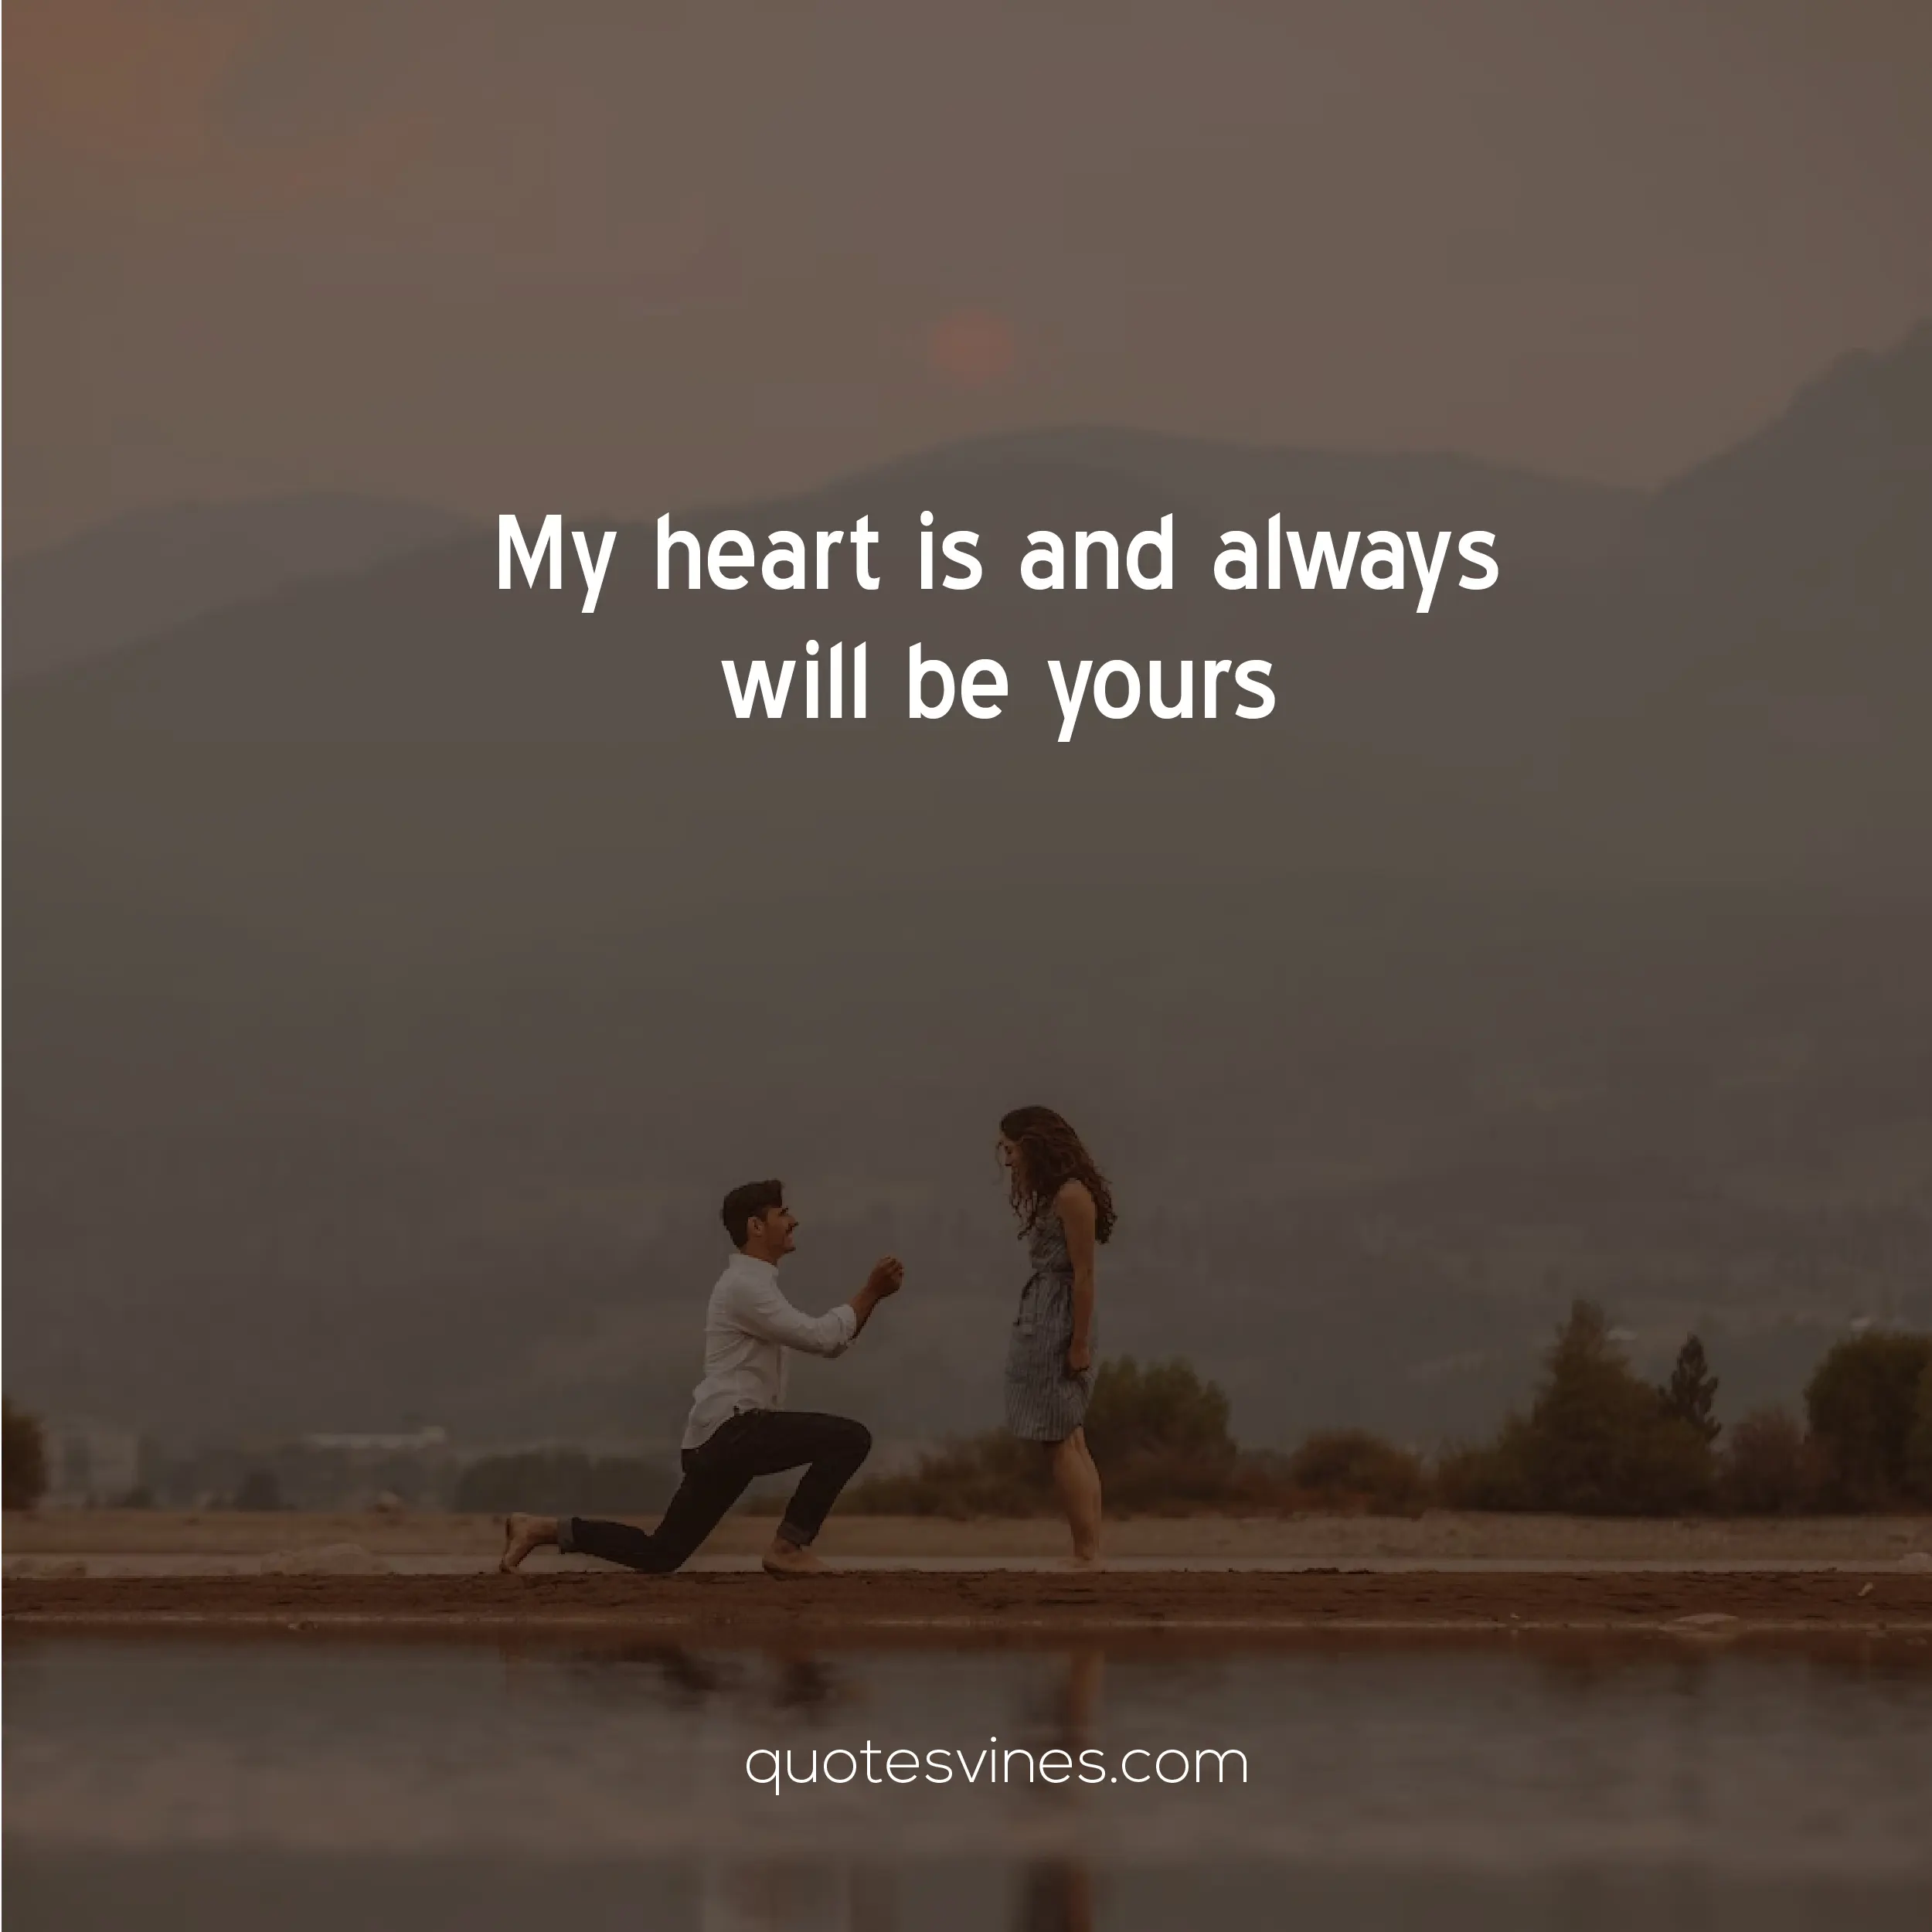 Best I Love You Quotes